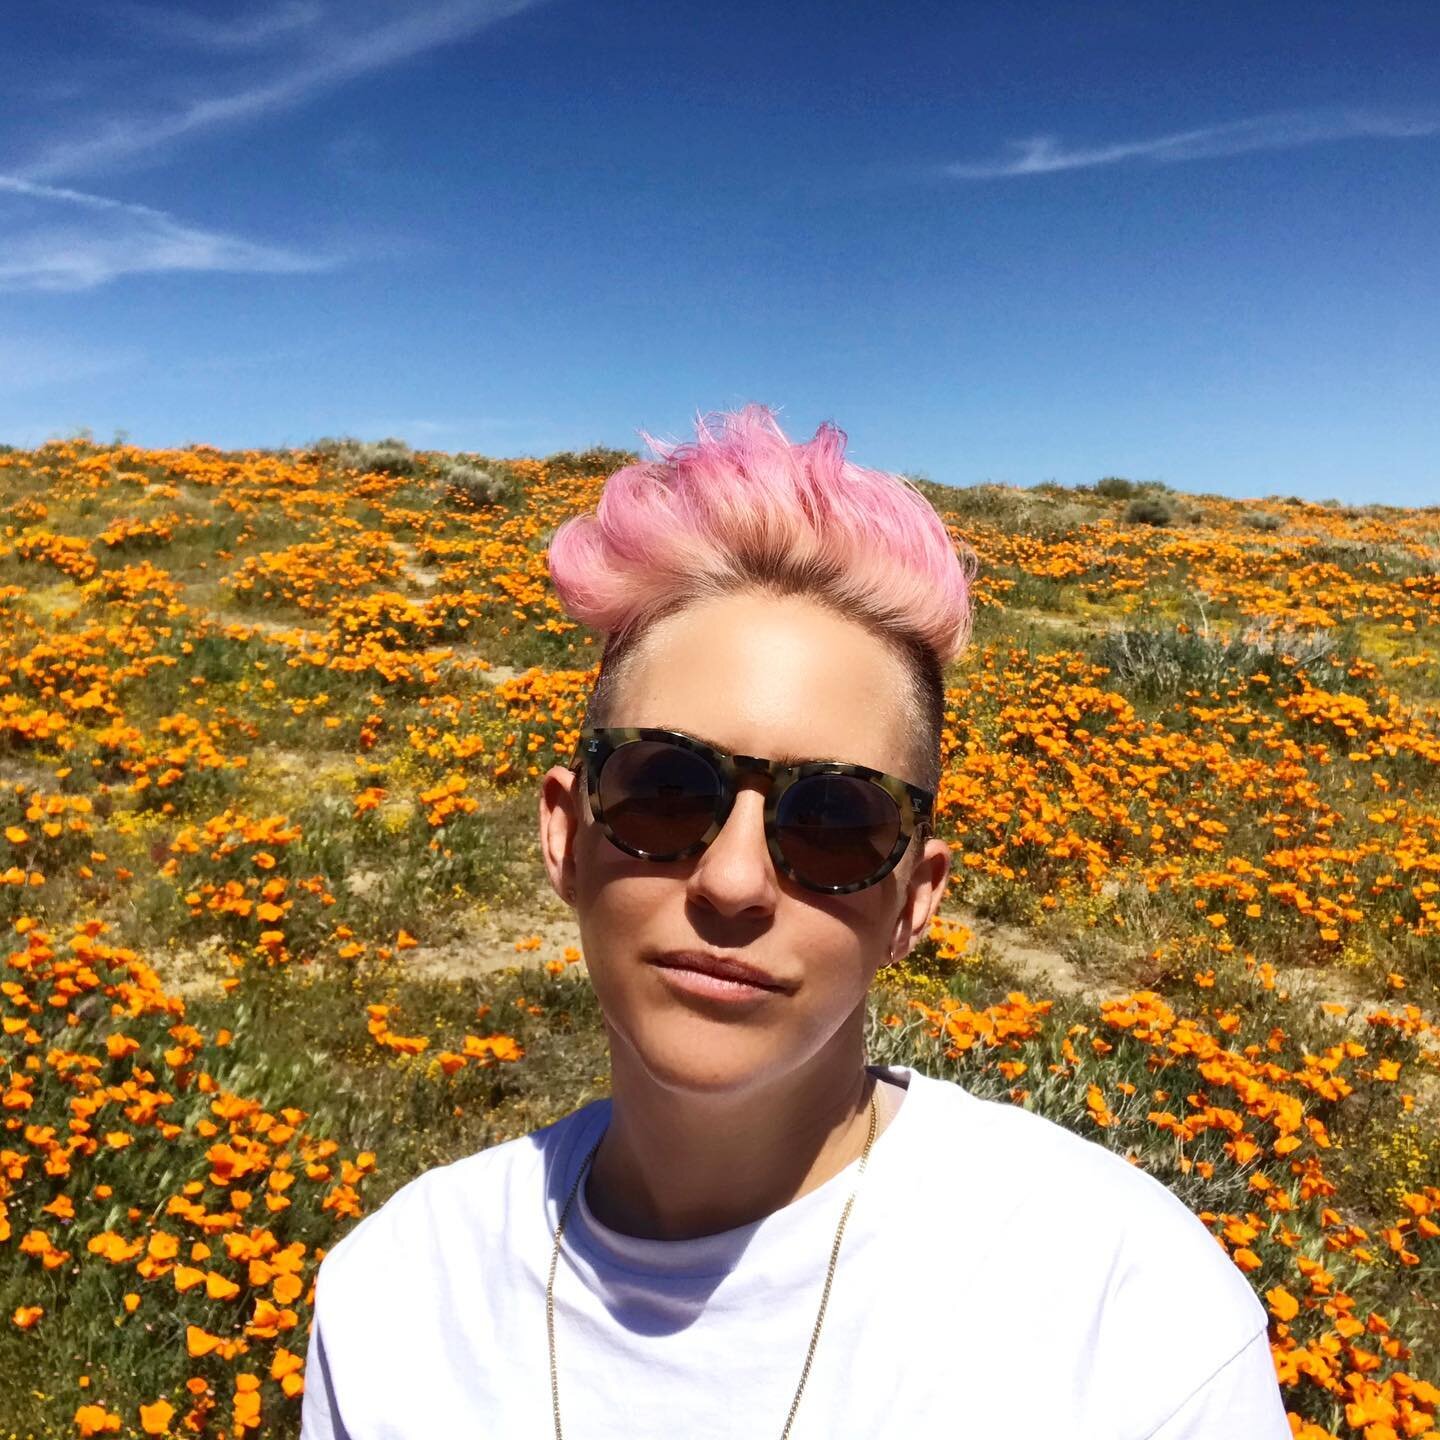 It&rsquo;s 2020 - i guess that means pink hair, poppies &amp; a pandemic. Goddess only knows what&rsquo;s next. How are you holding up?